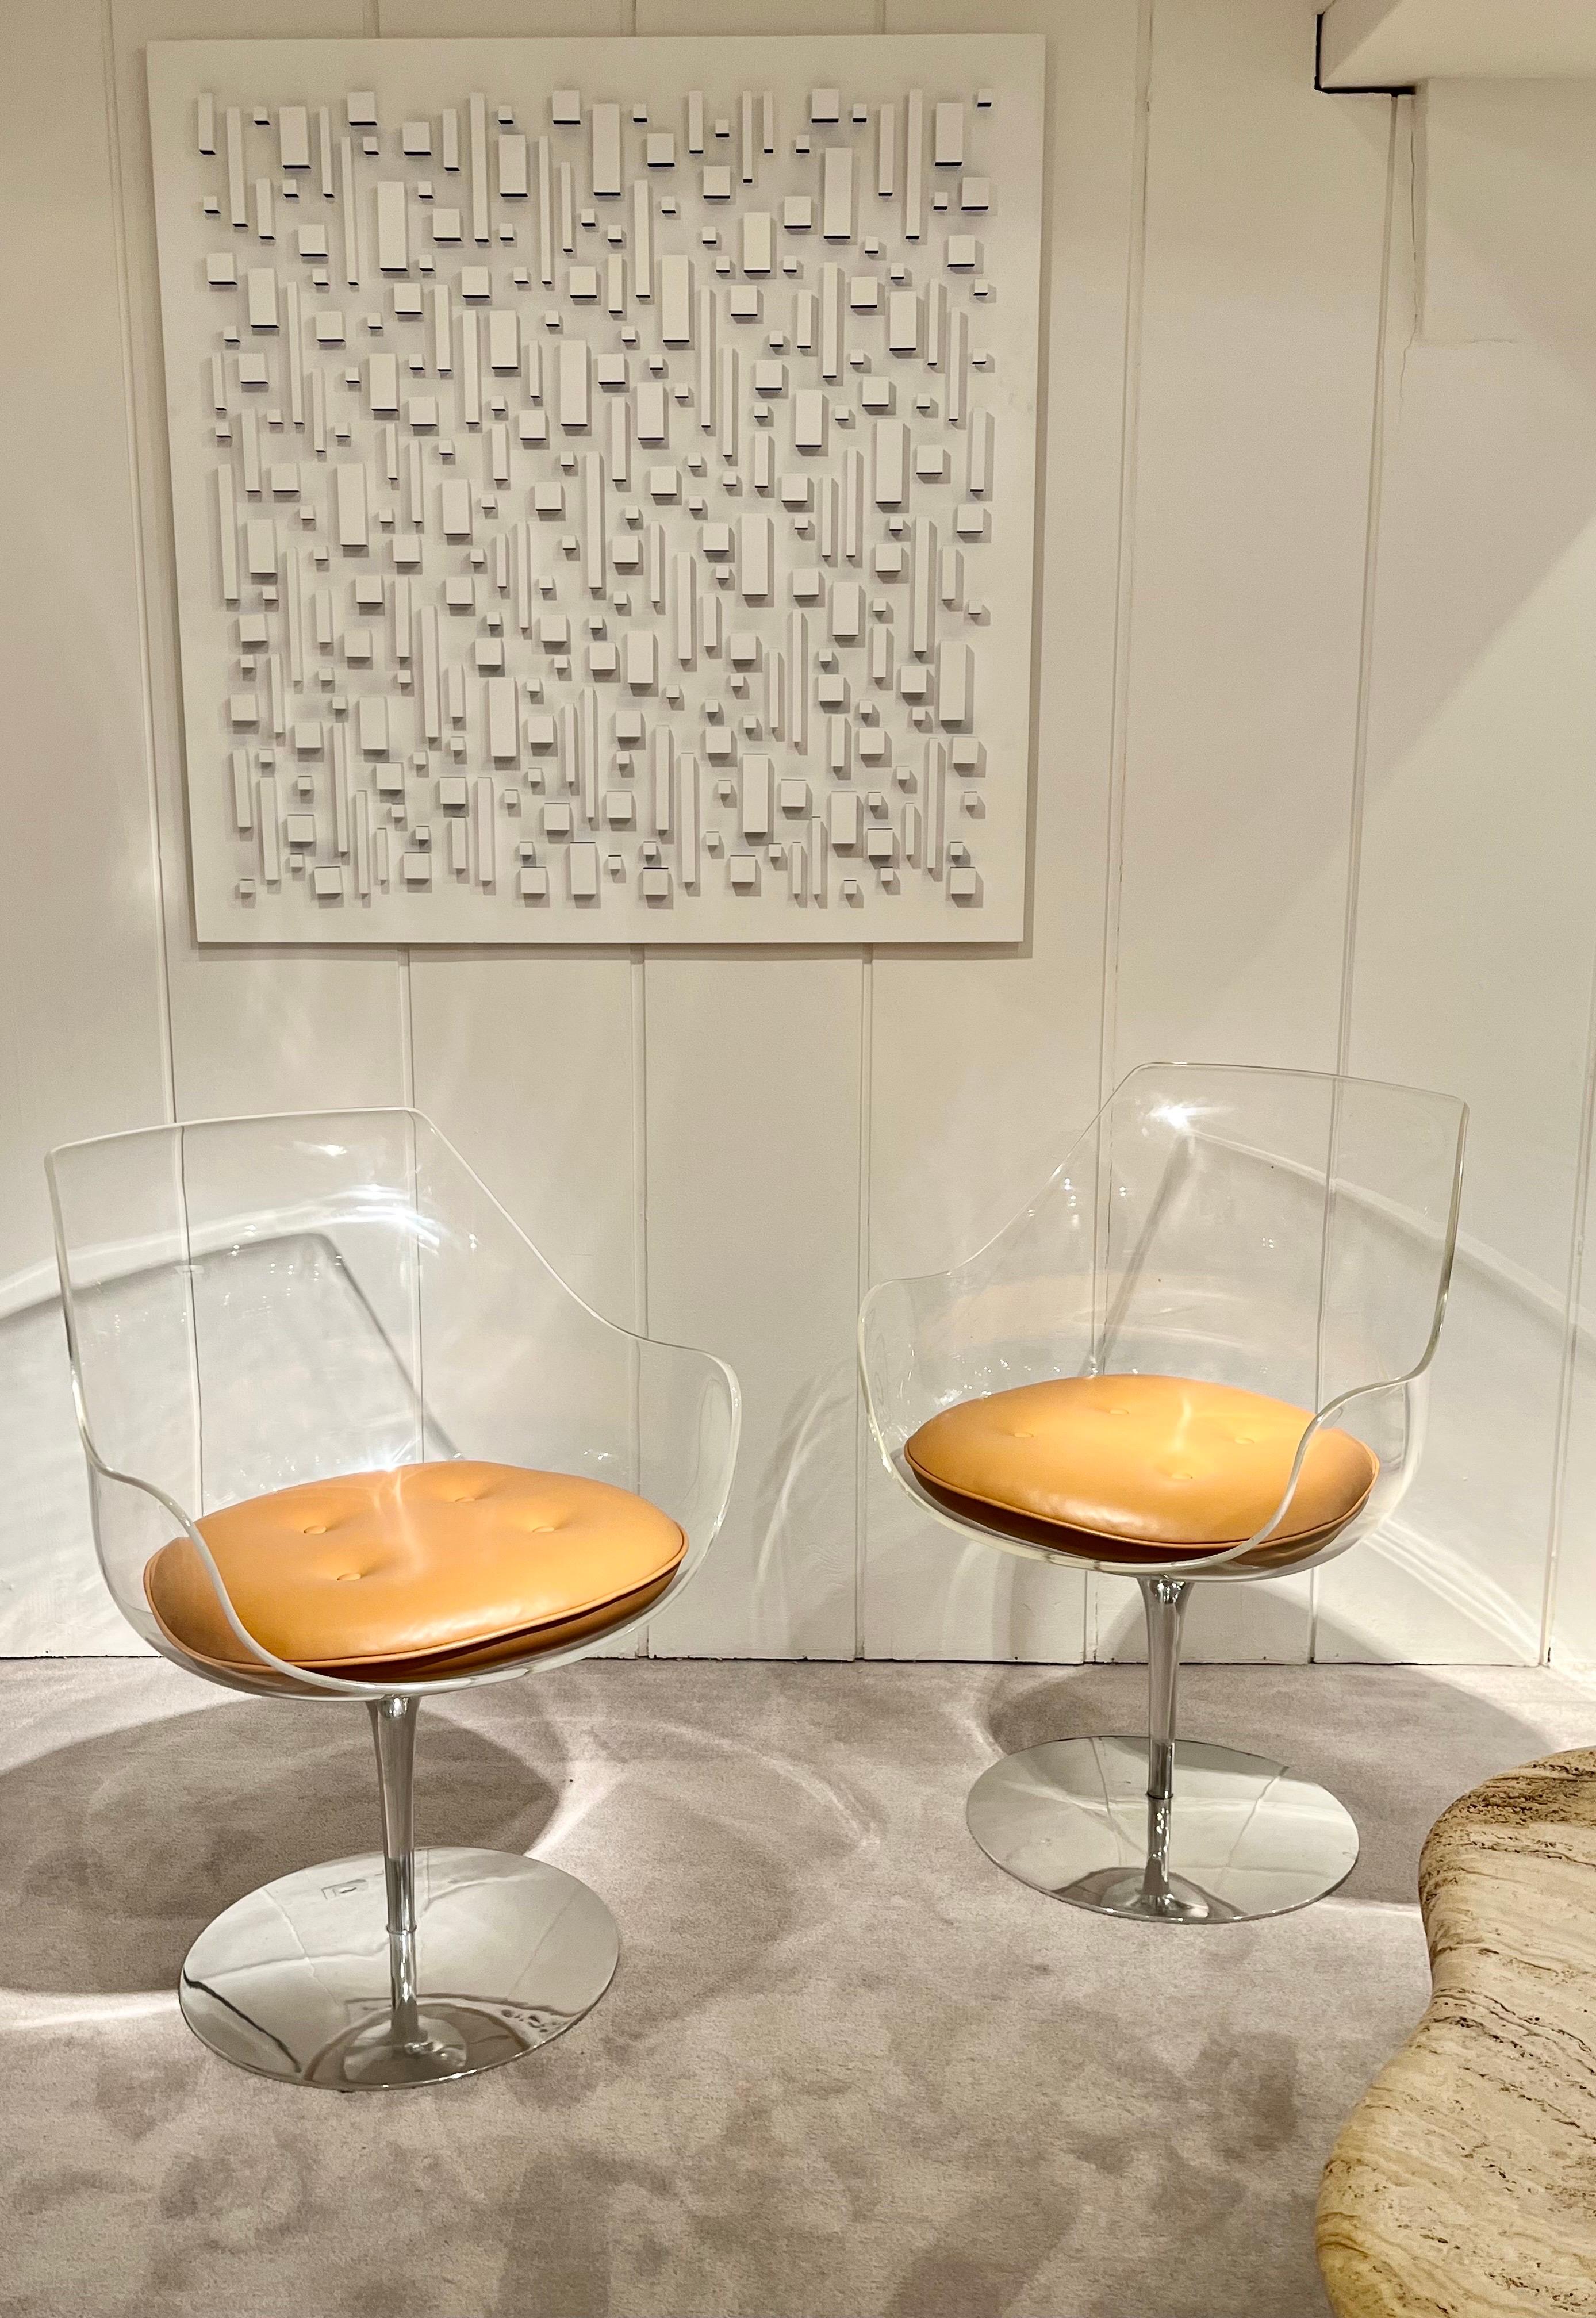 Pair of Lucite chairs By Erwine & Estelle Laverne,
Edited By Formes Nouvelles
Lucite and polished aluminum Champagne swivel chair. 
New havana leather cushions. 
 Signed and stamped on bottom: Laverne.